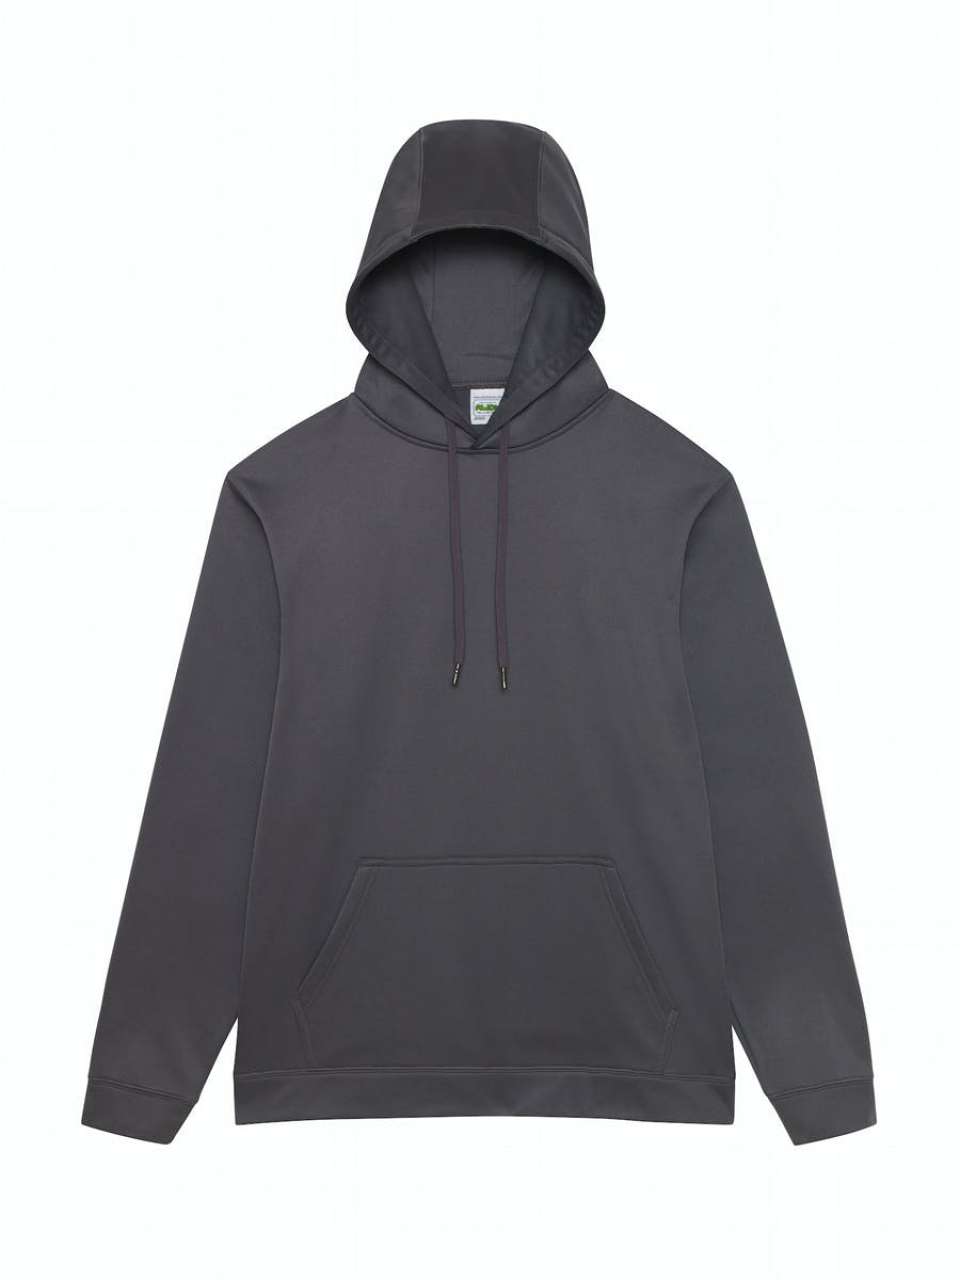 Promo  SPORTS POLYESTER HOODIE